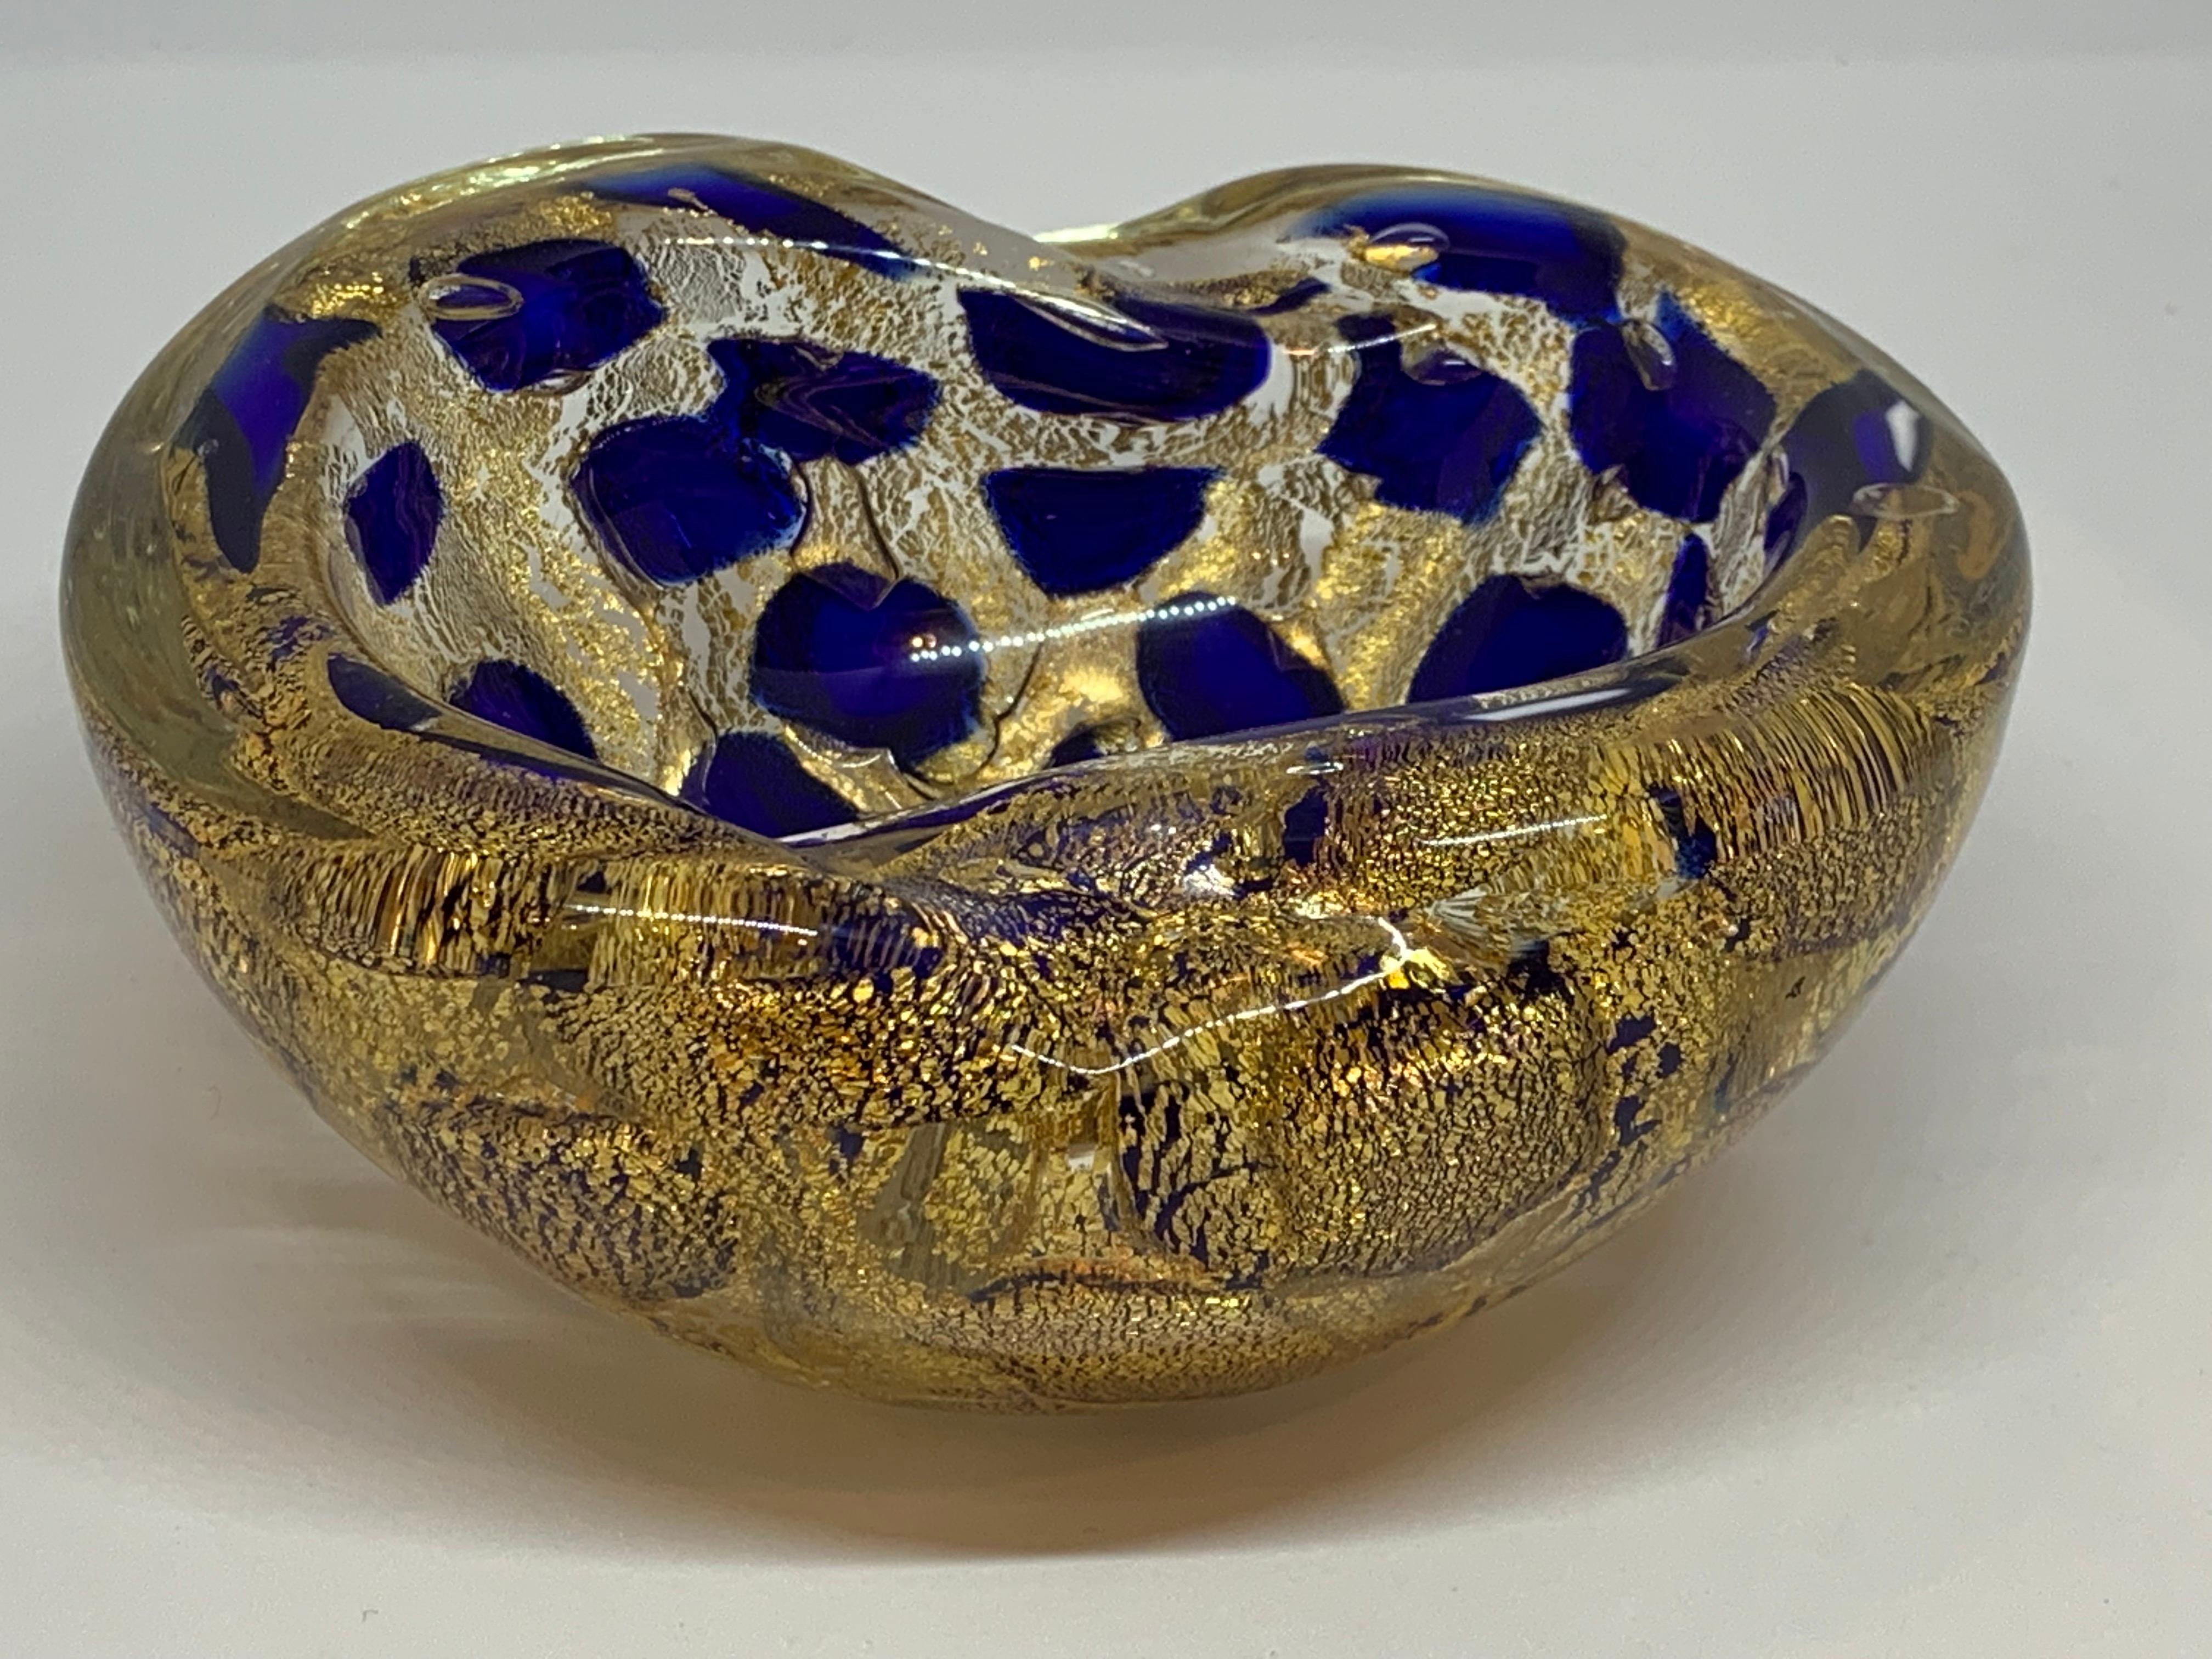 1950s Vibrant Cobalt Blue and Gold Murano Ashtray Bowl by Barovier and Toso 4